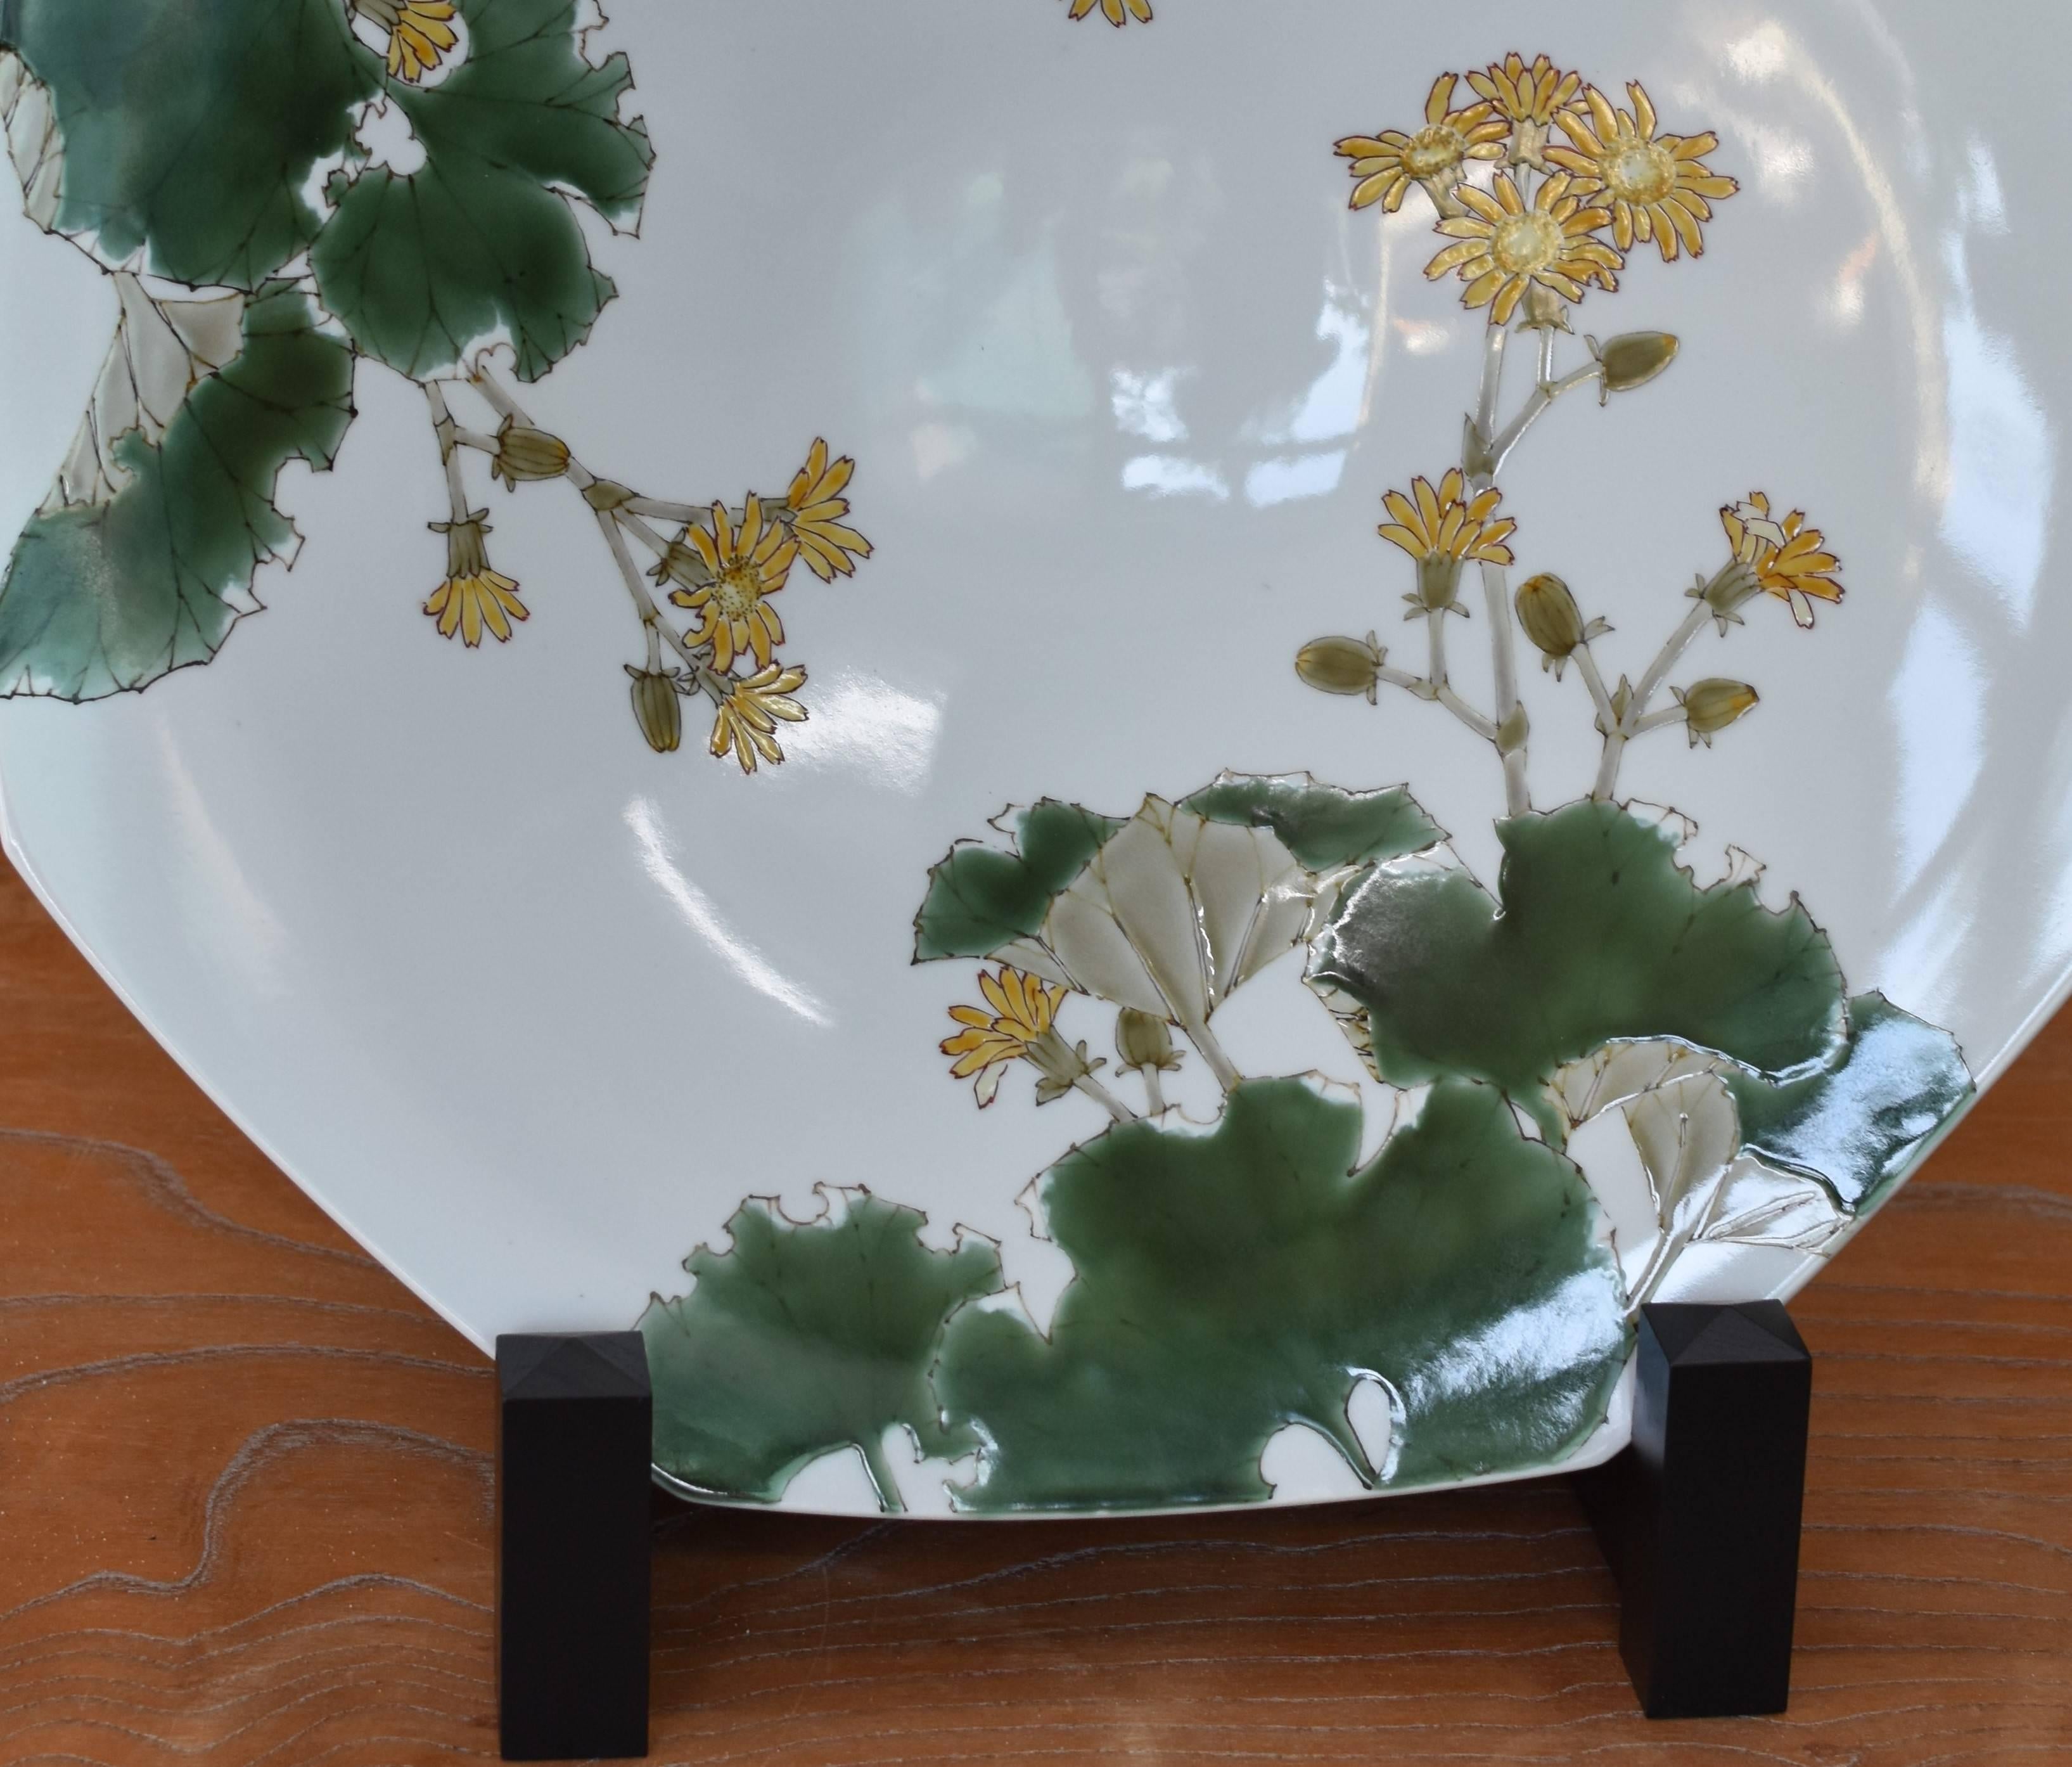 Exquisite large Japanese contemporary hand-painted signed deep porcelain decorative charger in a stunning octagonal shape, a signed masterpiece by a highly acclaimed award-winning master porcelain artist of the Kutani region of Japan. This artist’s